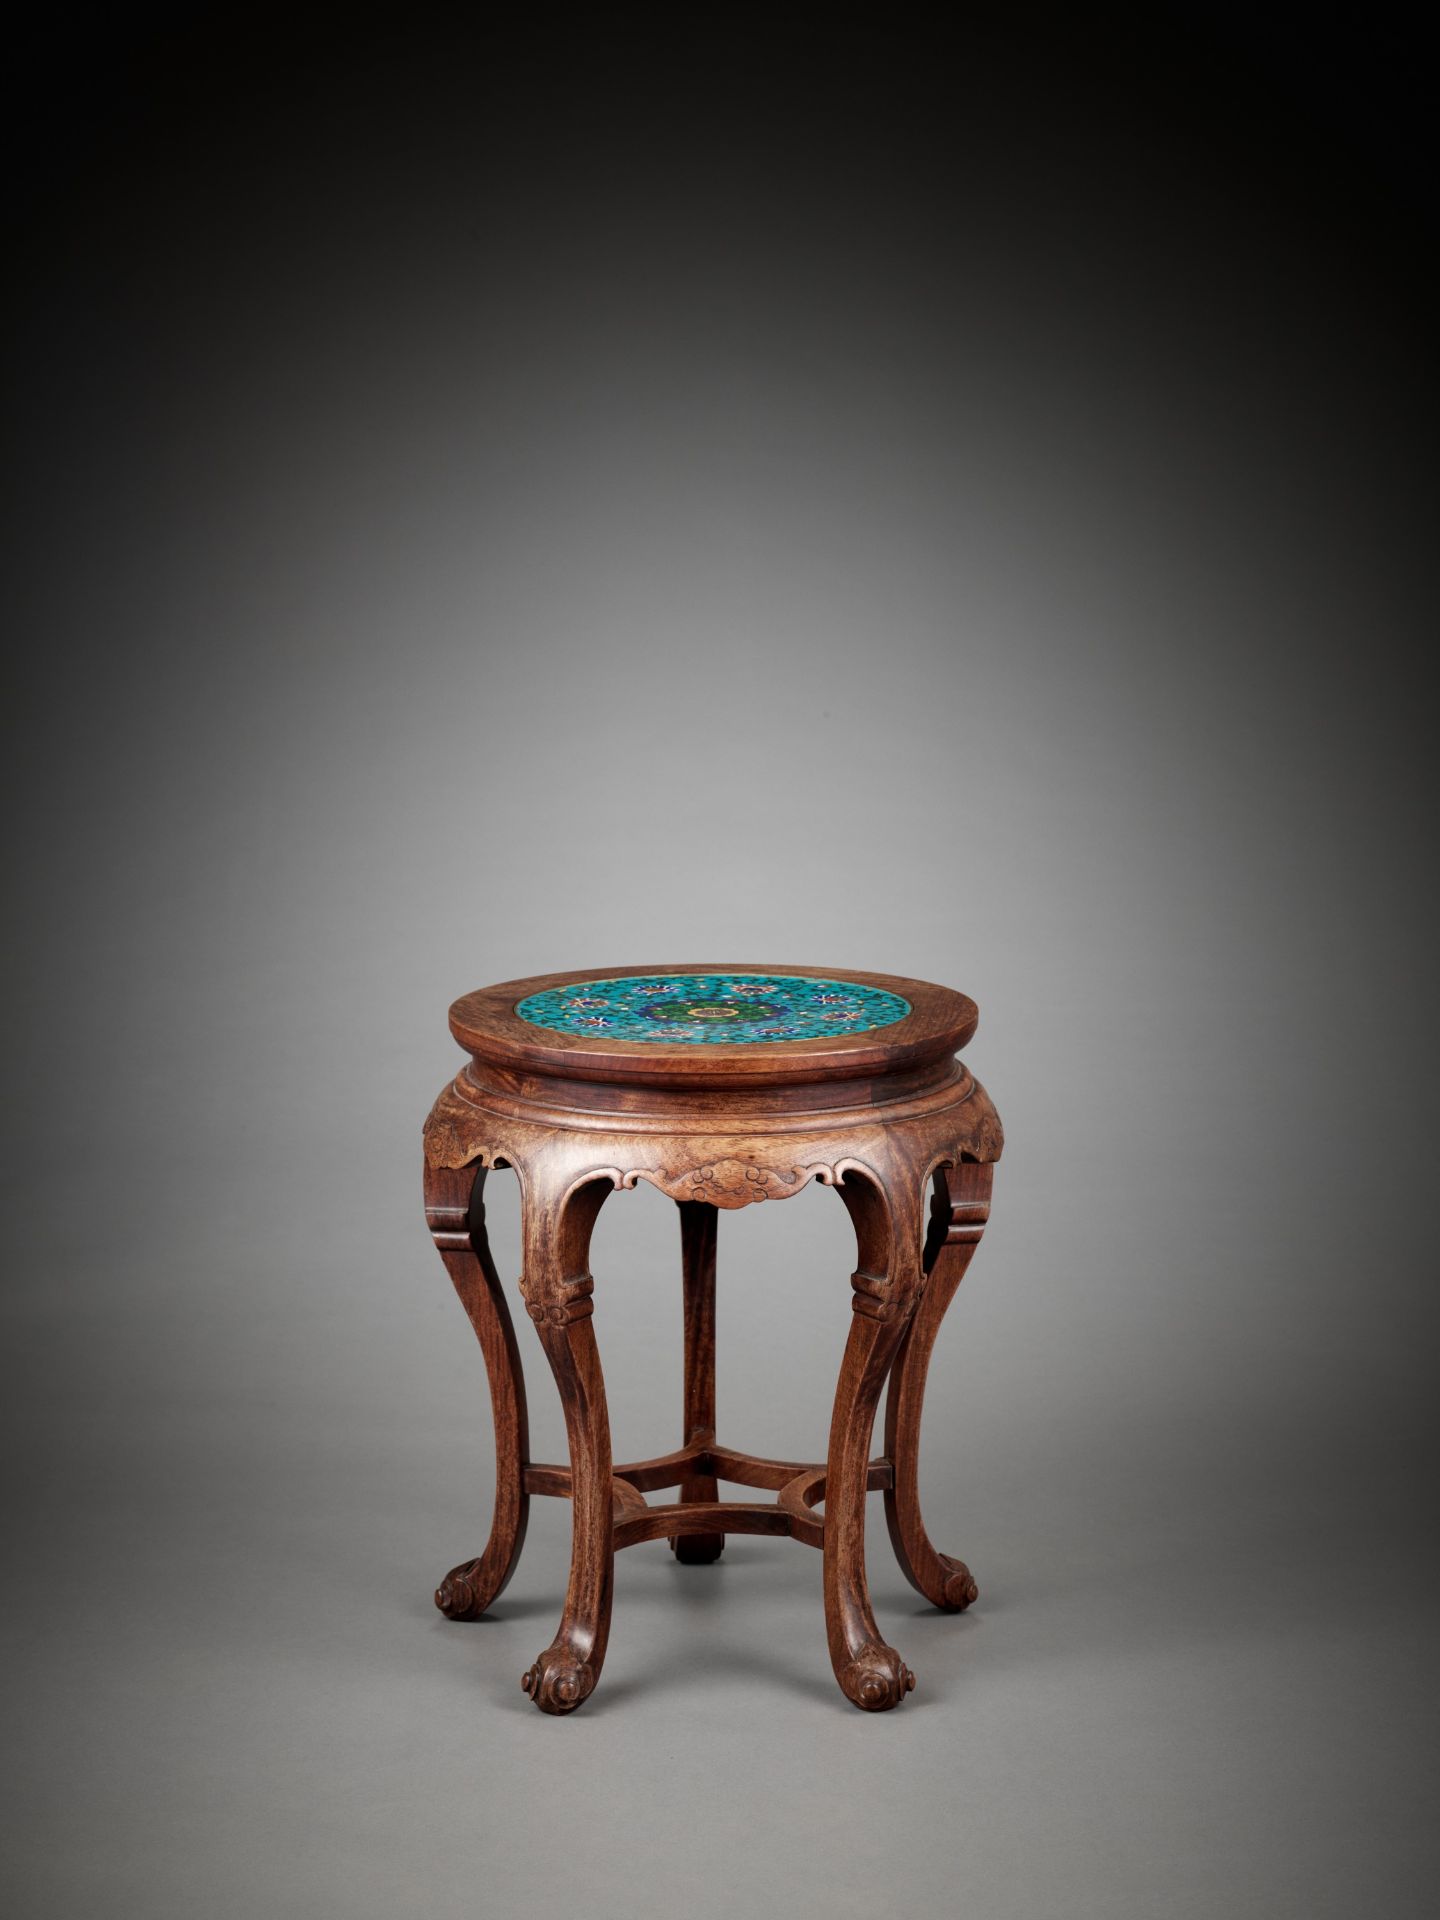 A CLOISONNE ENAMEL-INSET HARDWOOD STAND, LATE QING TO REPUBLIC - Image 3 of 8